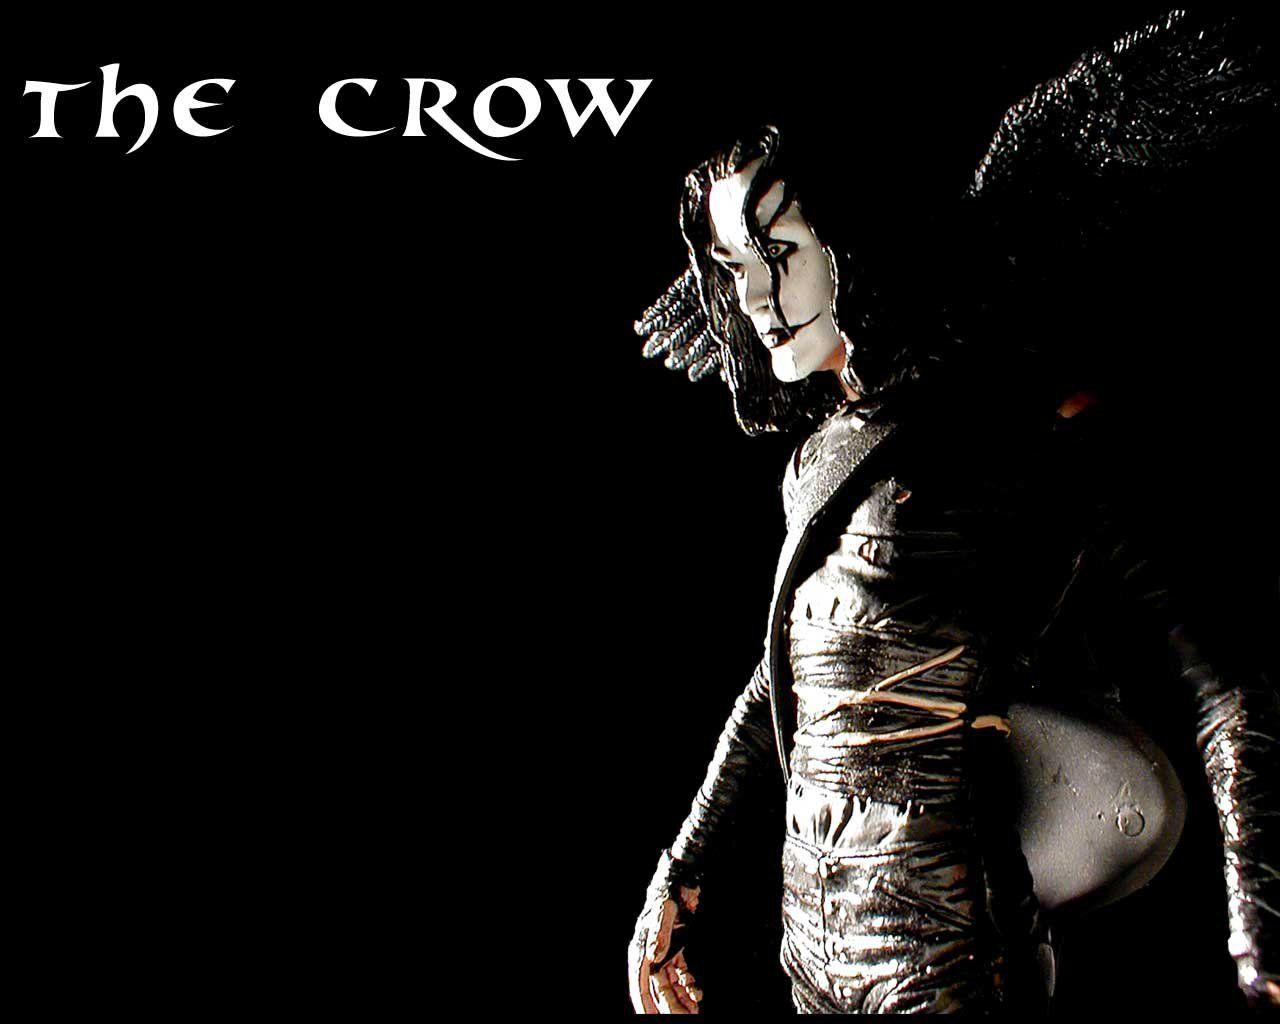 The Crow Wallpaper